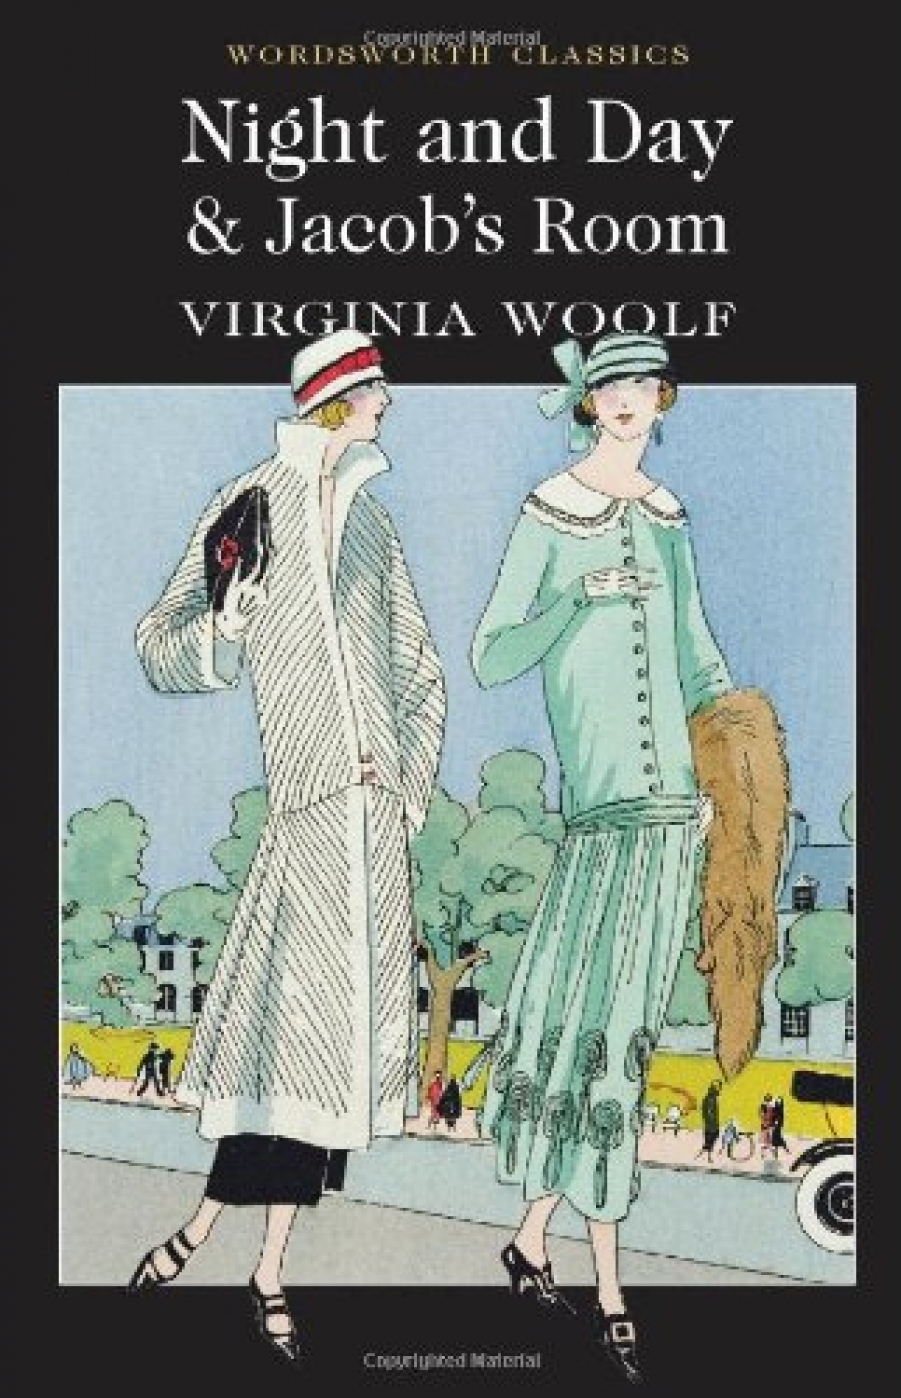 Virginia, Woolf Night and Day & Jacob's Room 